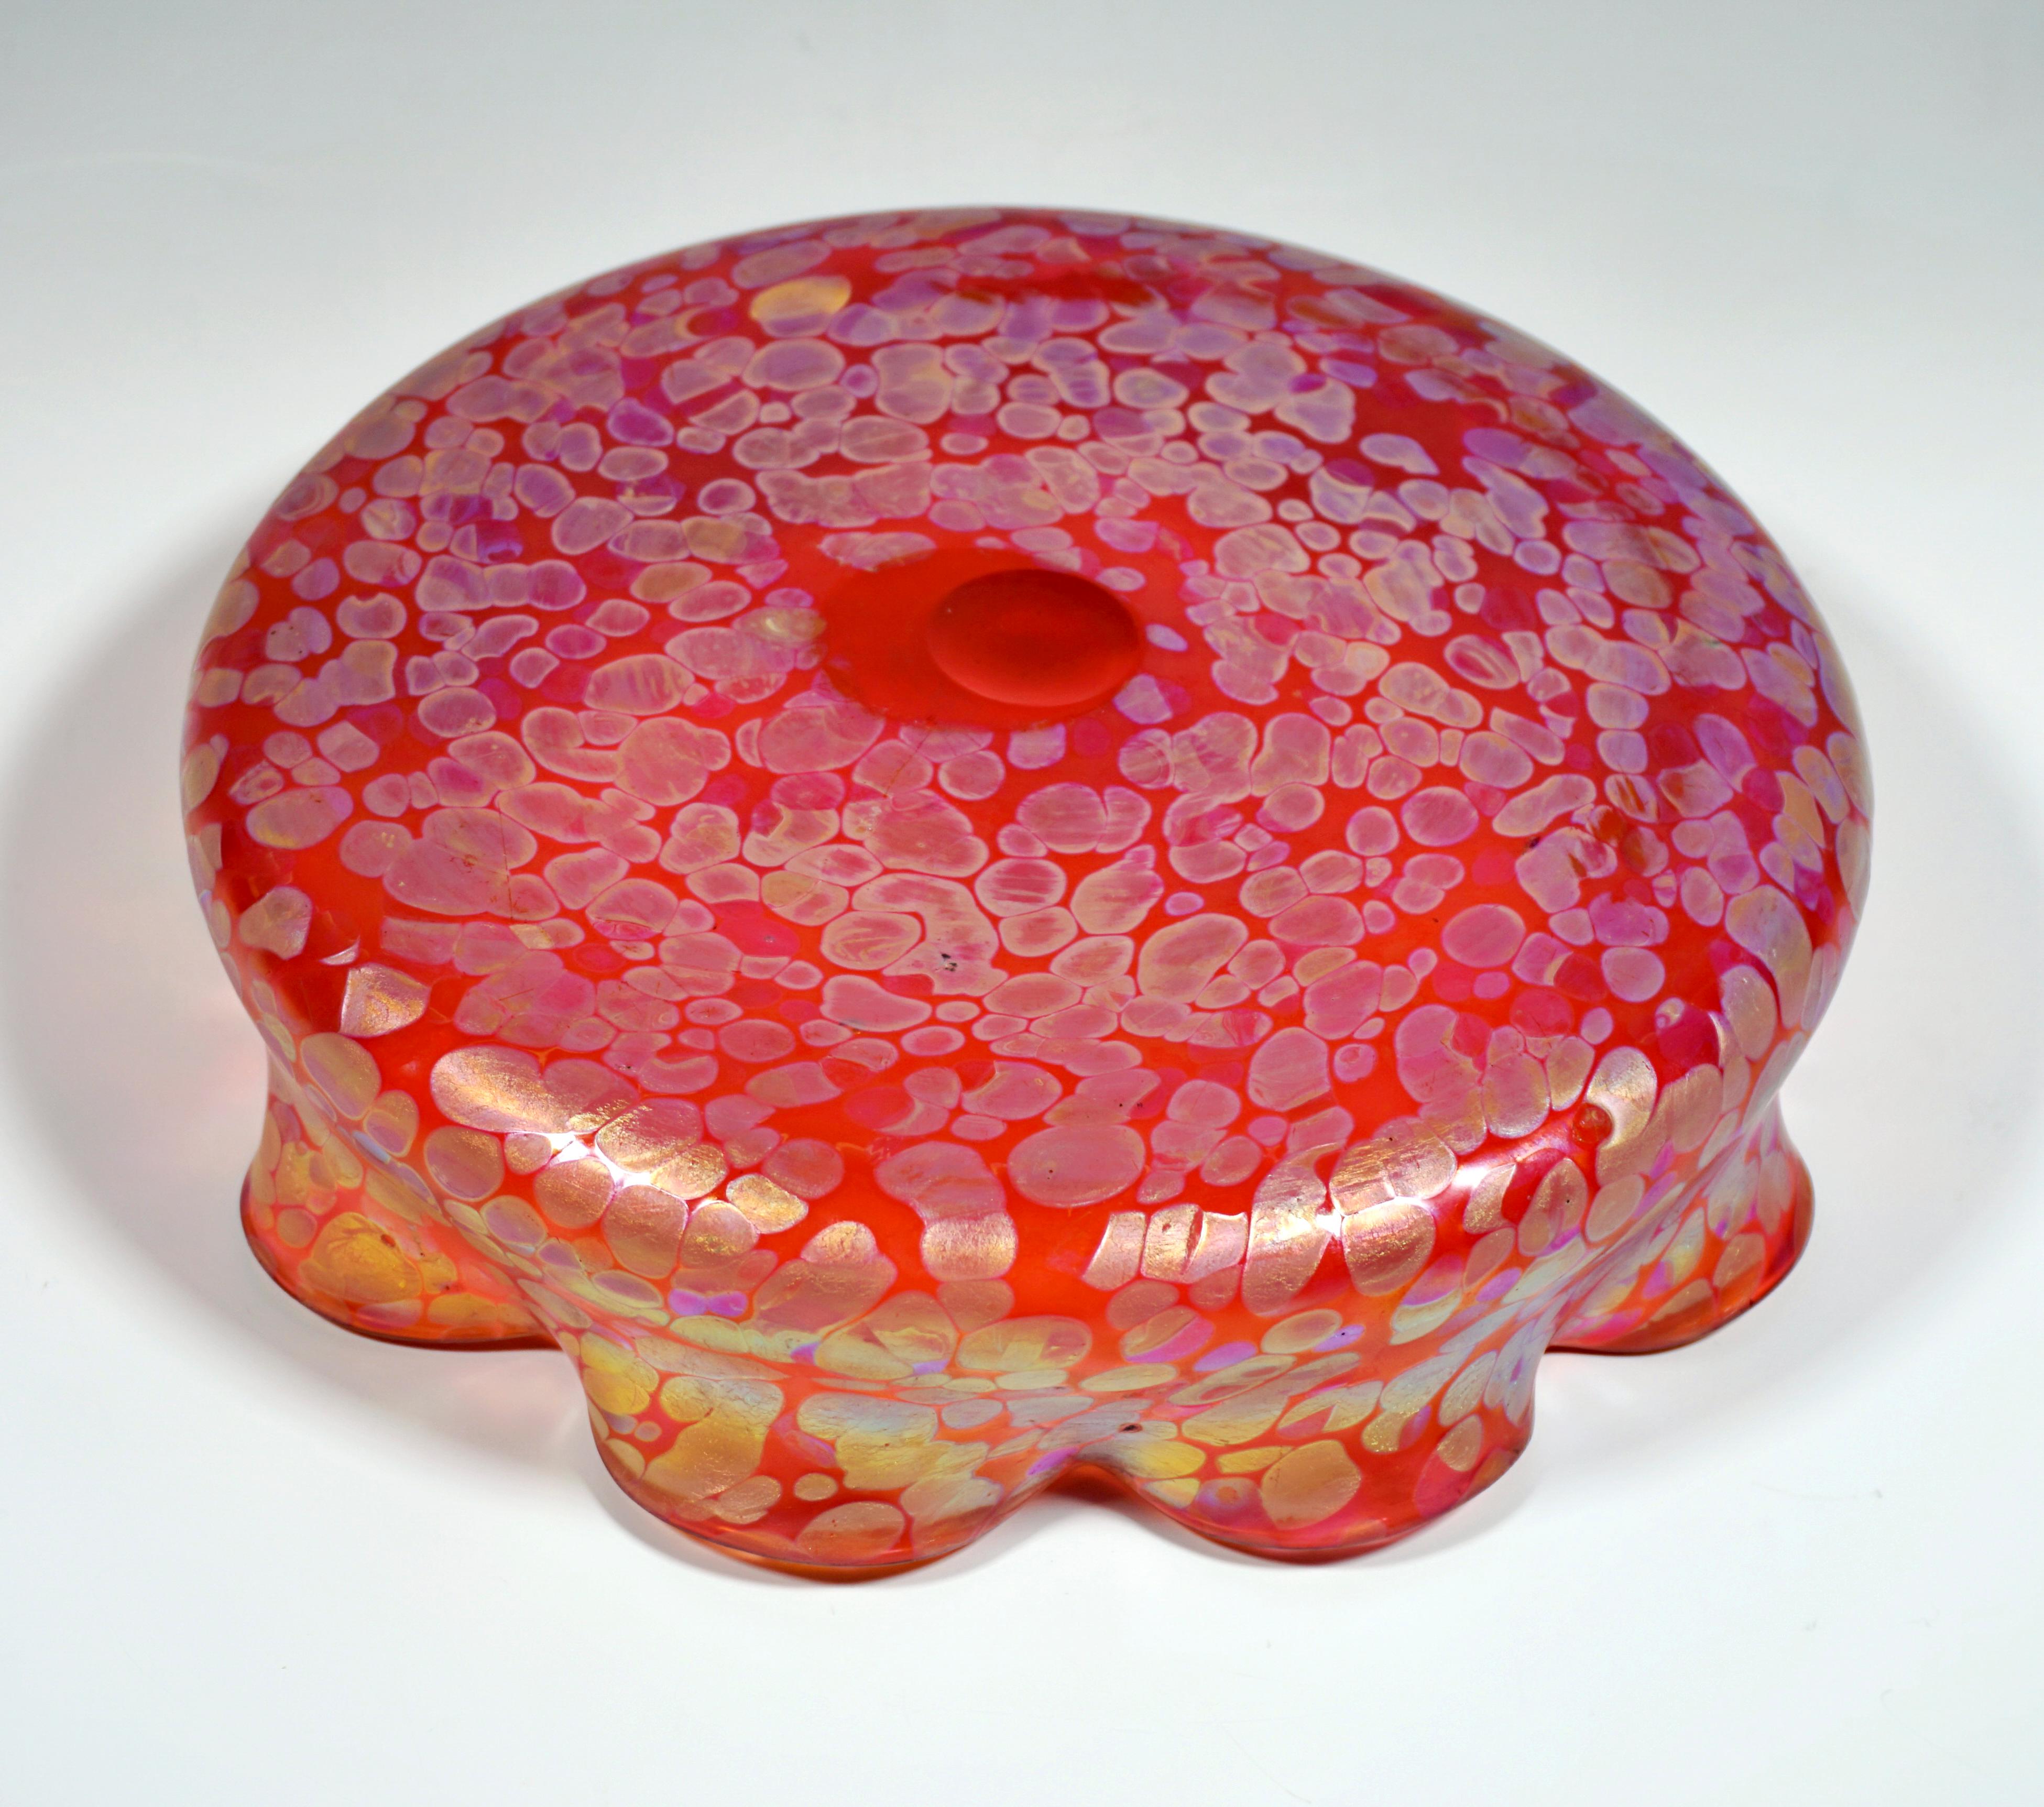 Loetz Art Nouveau Flower Bowl Metallic-Red Papillon, Austria-Hungary, ca 1900 In Good Condition For Sale In Vienna, AT